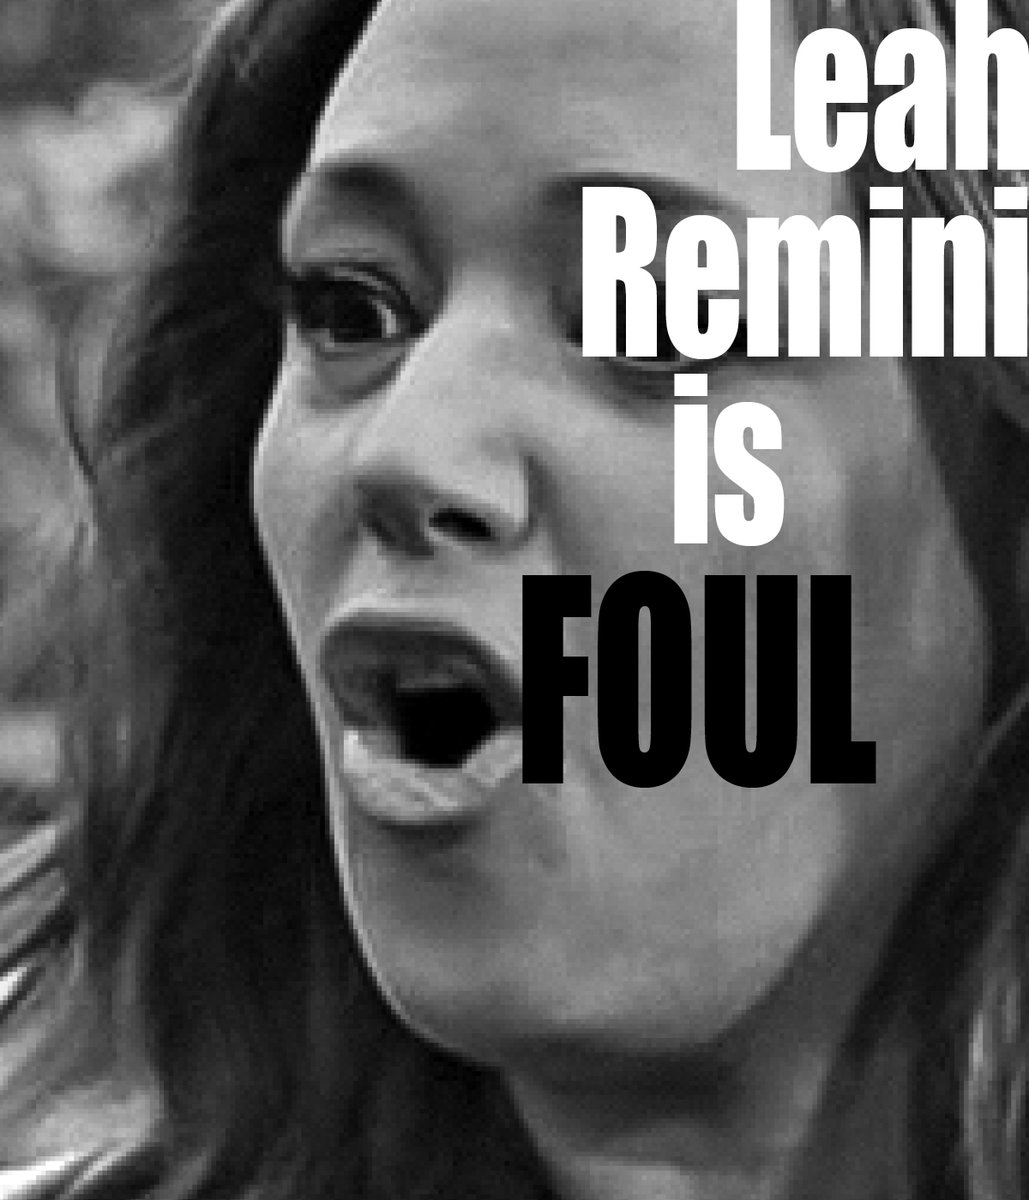 Foul (adj.): morally or spiritually offensive, or revolting. @LeahRemini is foul. Her personality is based on bigotry and hate, and her character is driven by her support for a rapist.